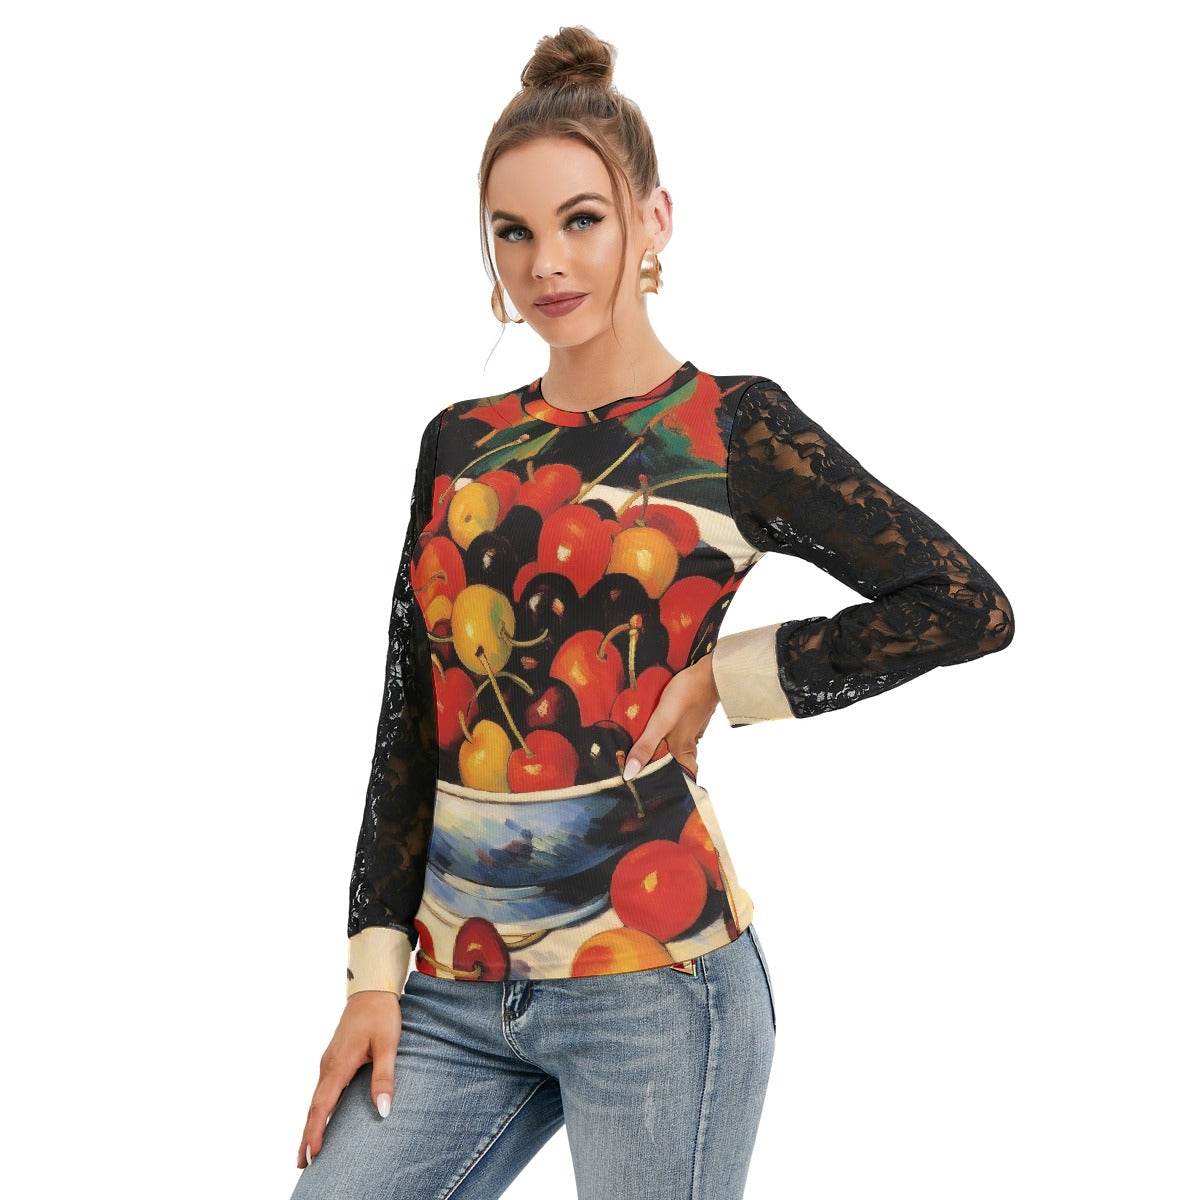 Summer Cherries Women's T-shirt And Sleeve With Black Lace